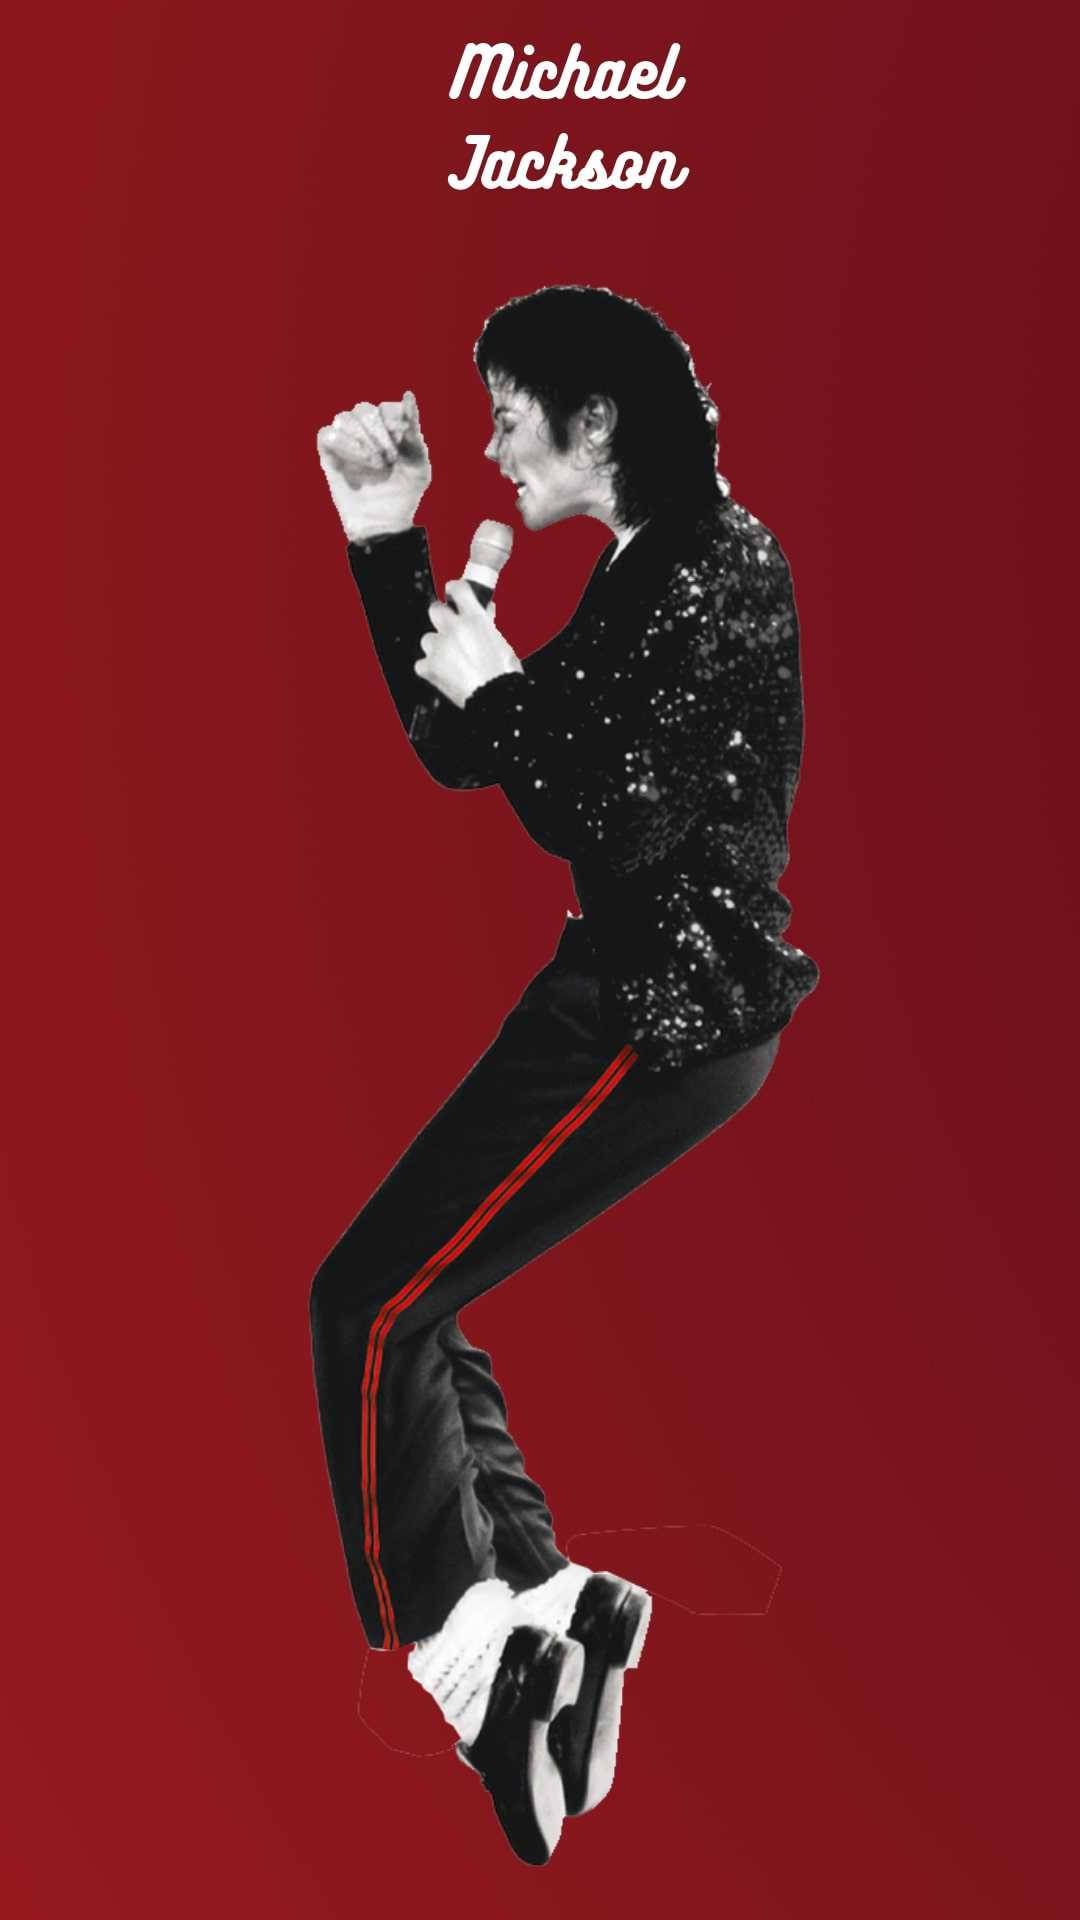 Michael Jackson is a legendary American singer, songwriter, and dancer. - Michael Jackson